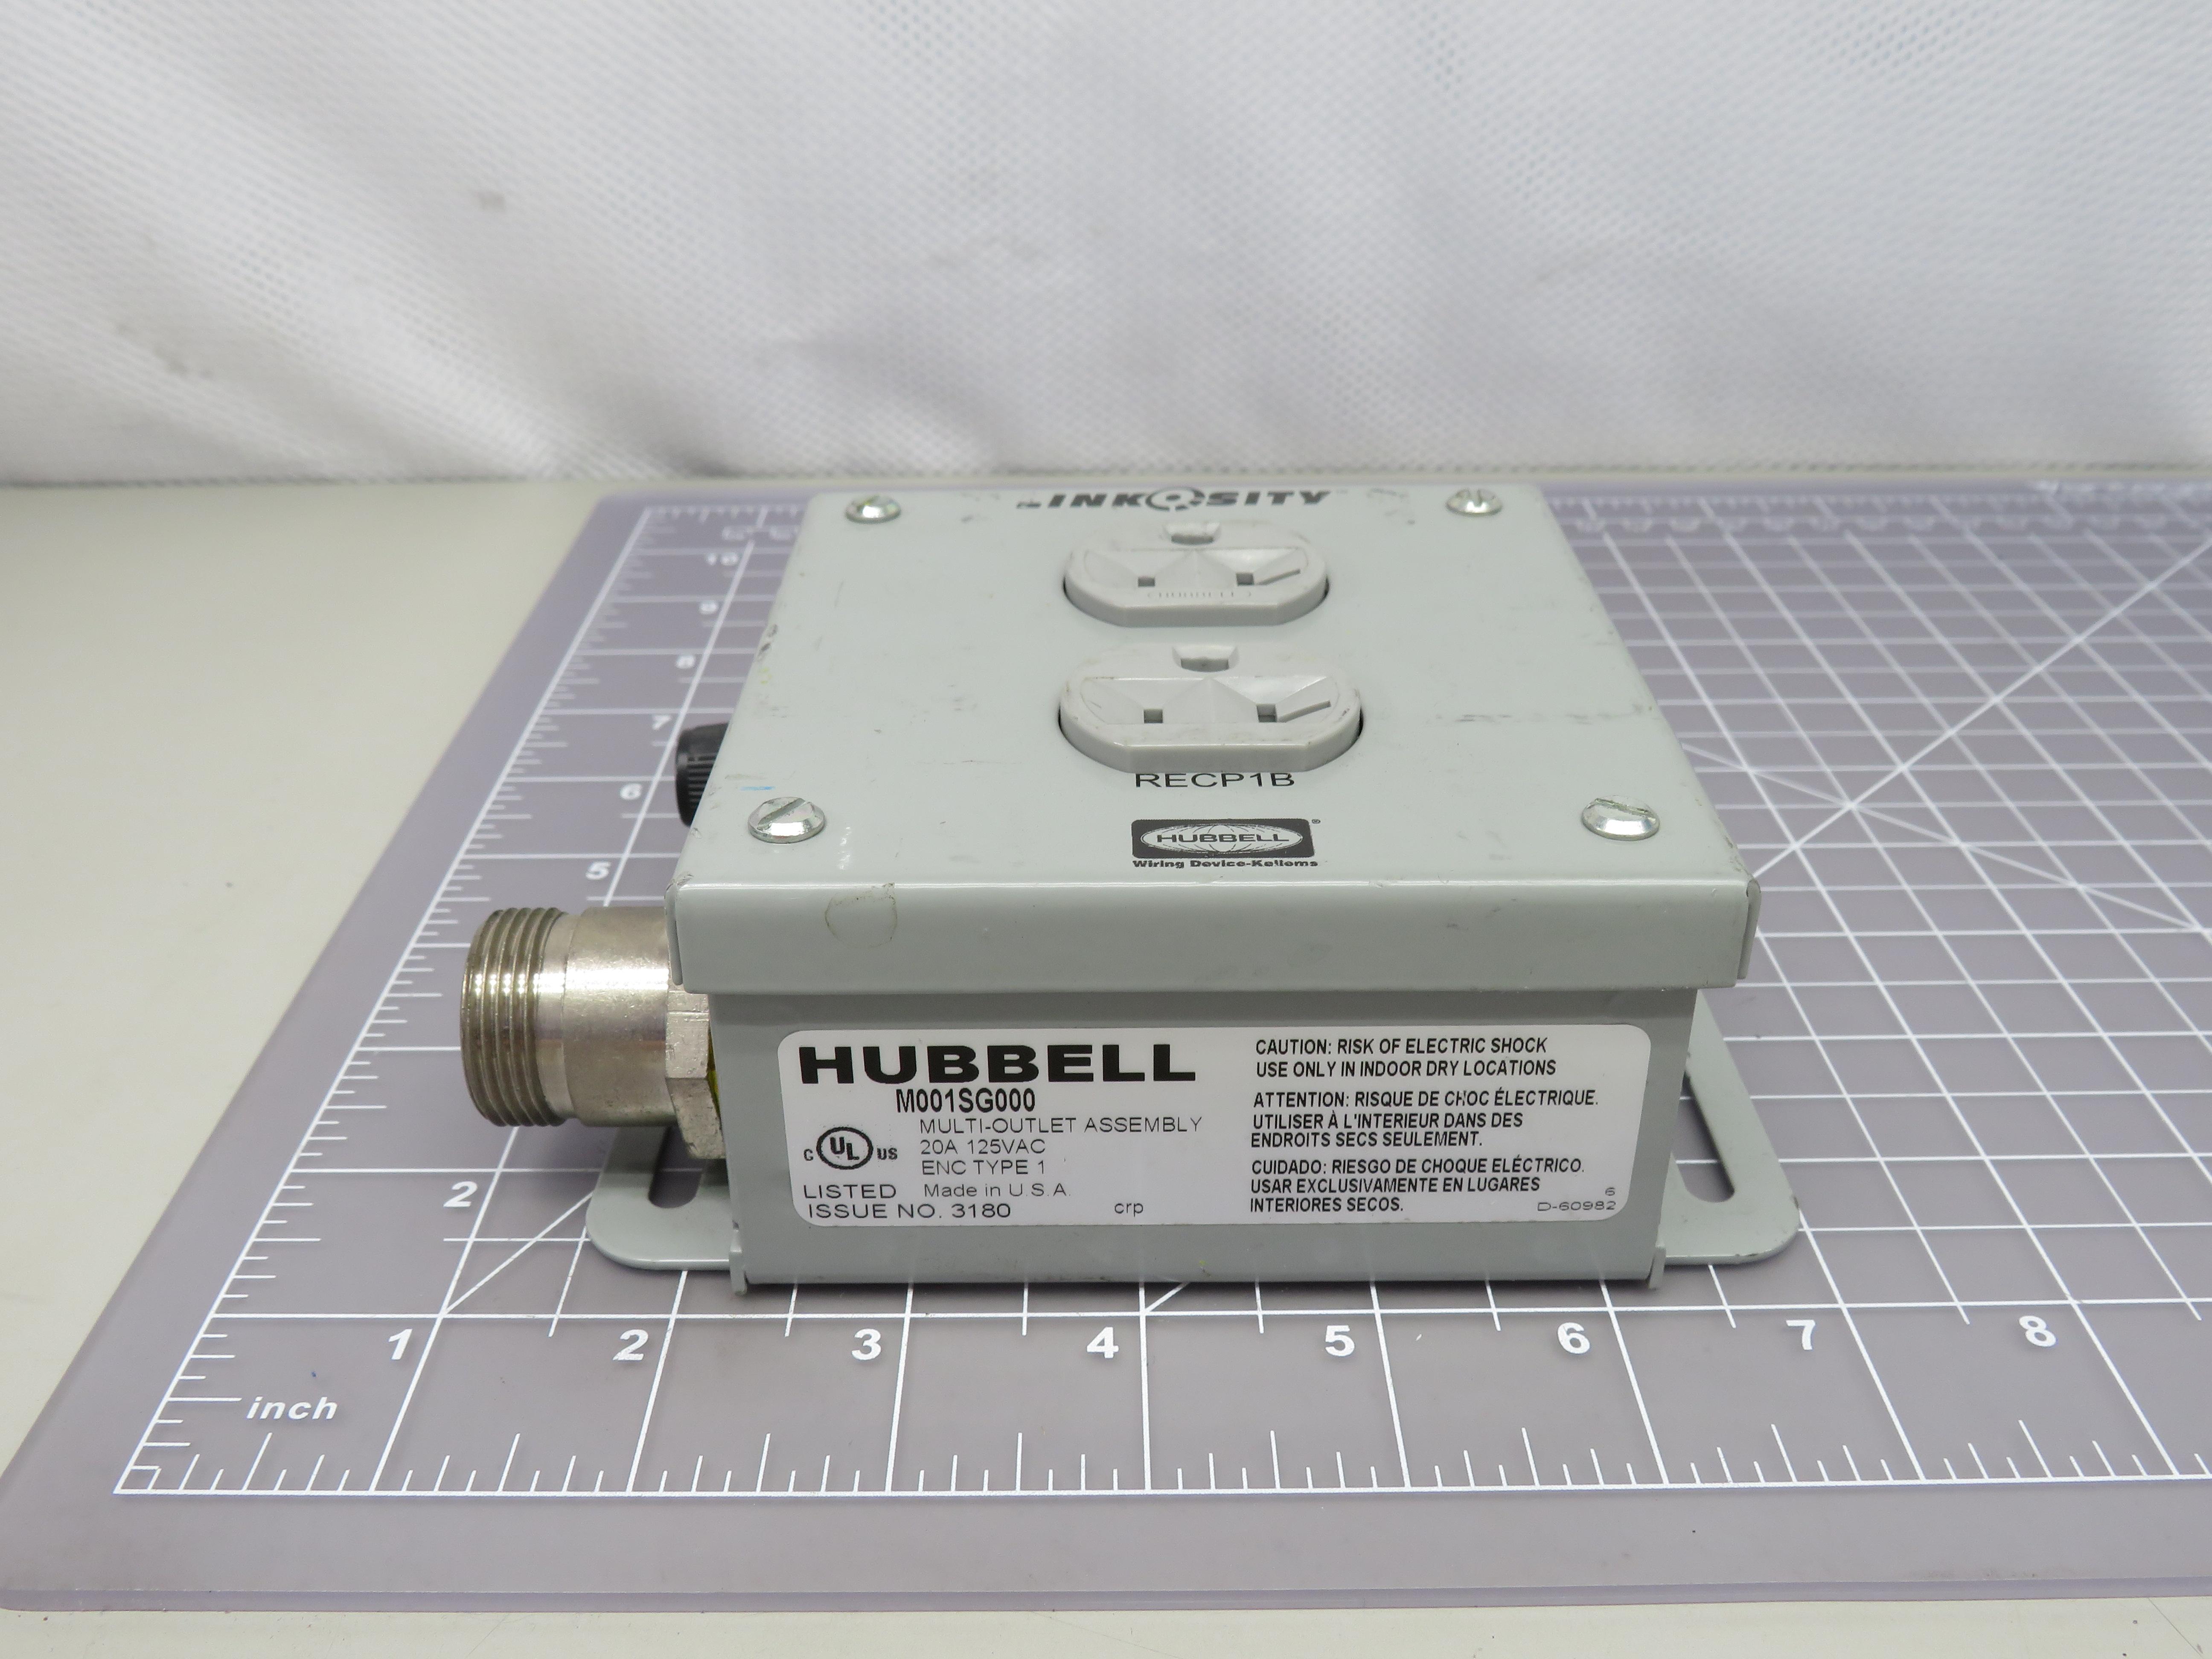 HUBBELL M001SG000 Power Distribution Multi-Outlet Assembly T158539 | eBay